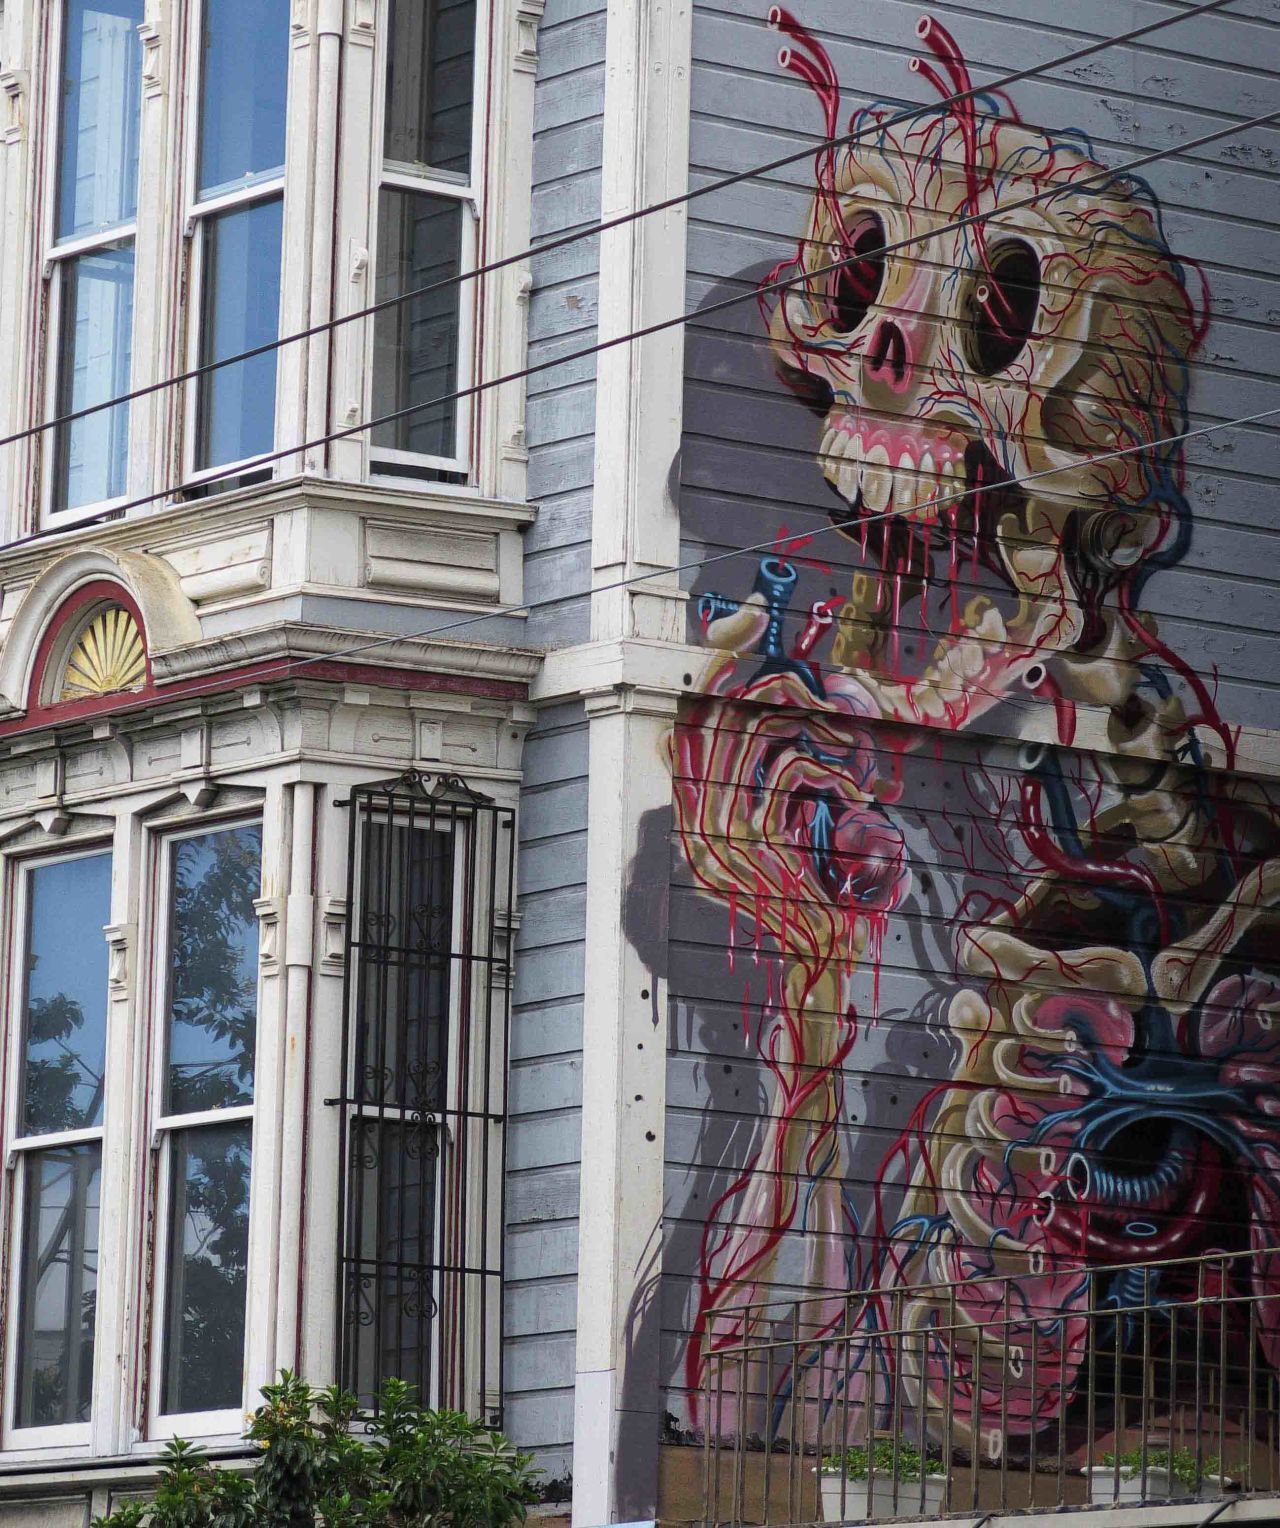 A professional mural illustrates the side of an antique house in San Francisco's Haight-Ashbury neighborhood.